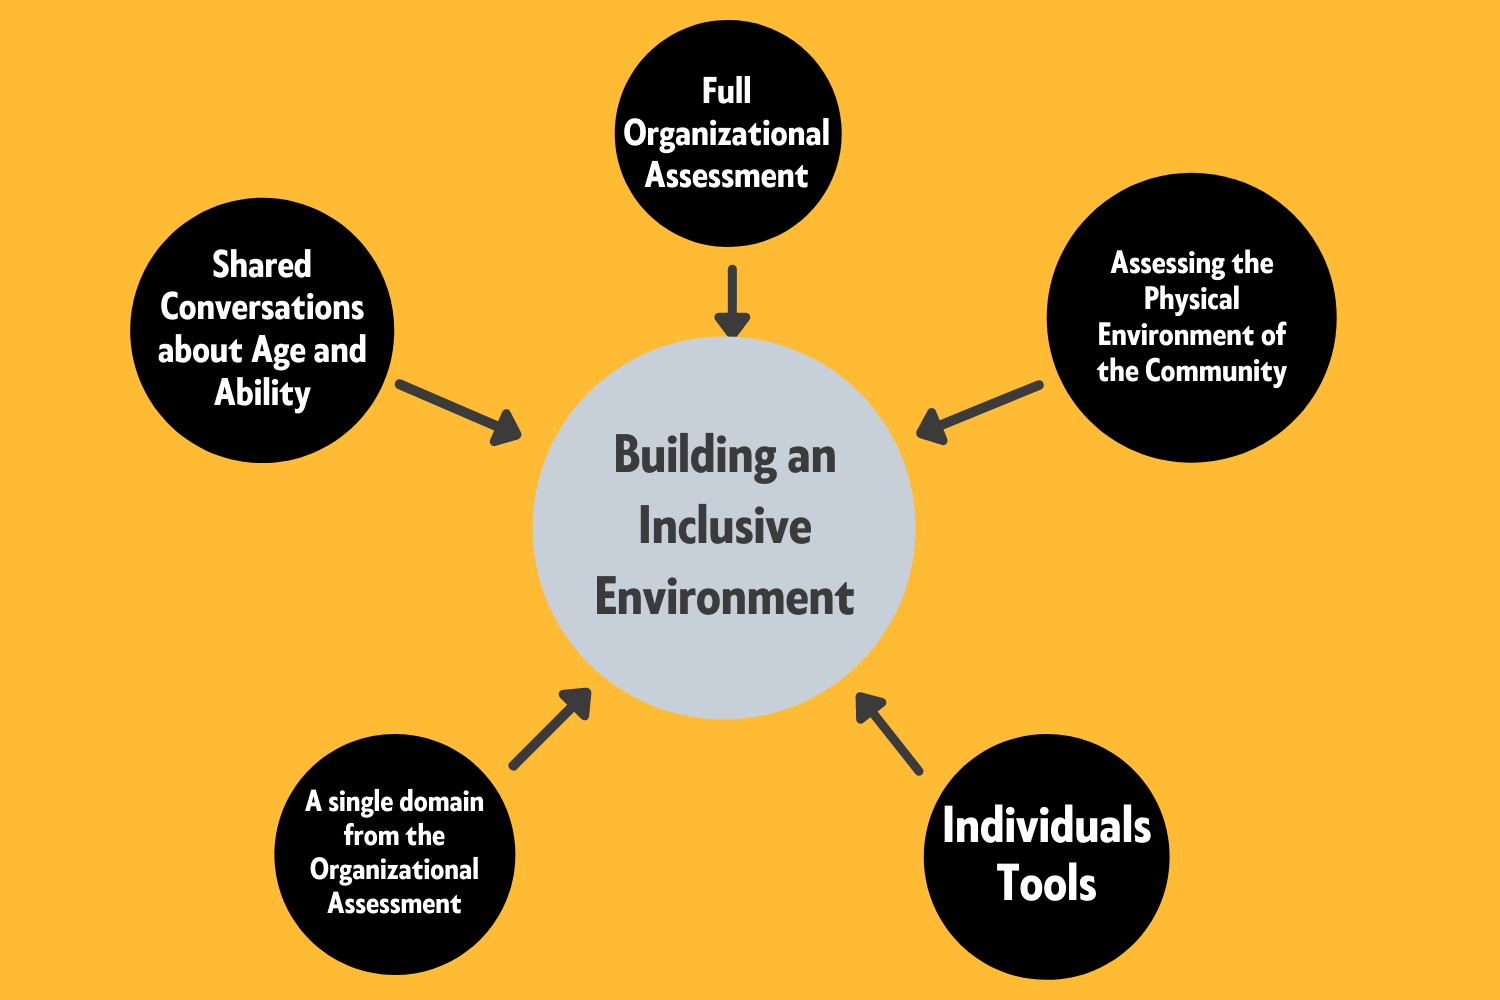 Get started building an inclusive environment with all of or a domain of the Organizational Assessment, Assessing the Physical Environment, Shared Conversations about Age and Ability, or Individual Tools